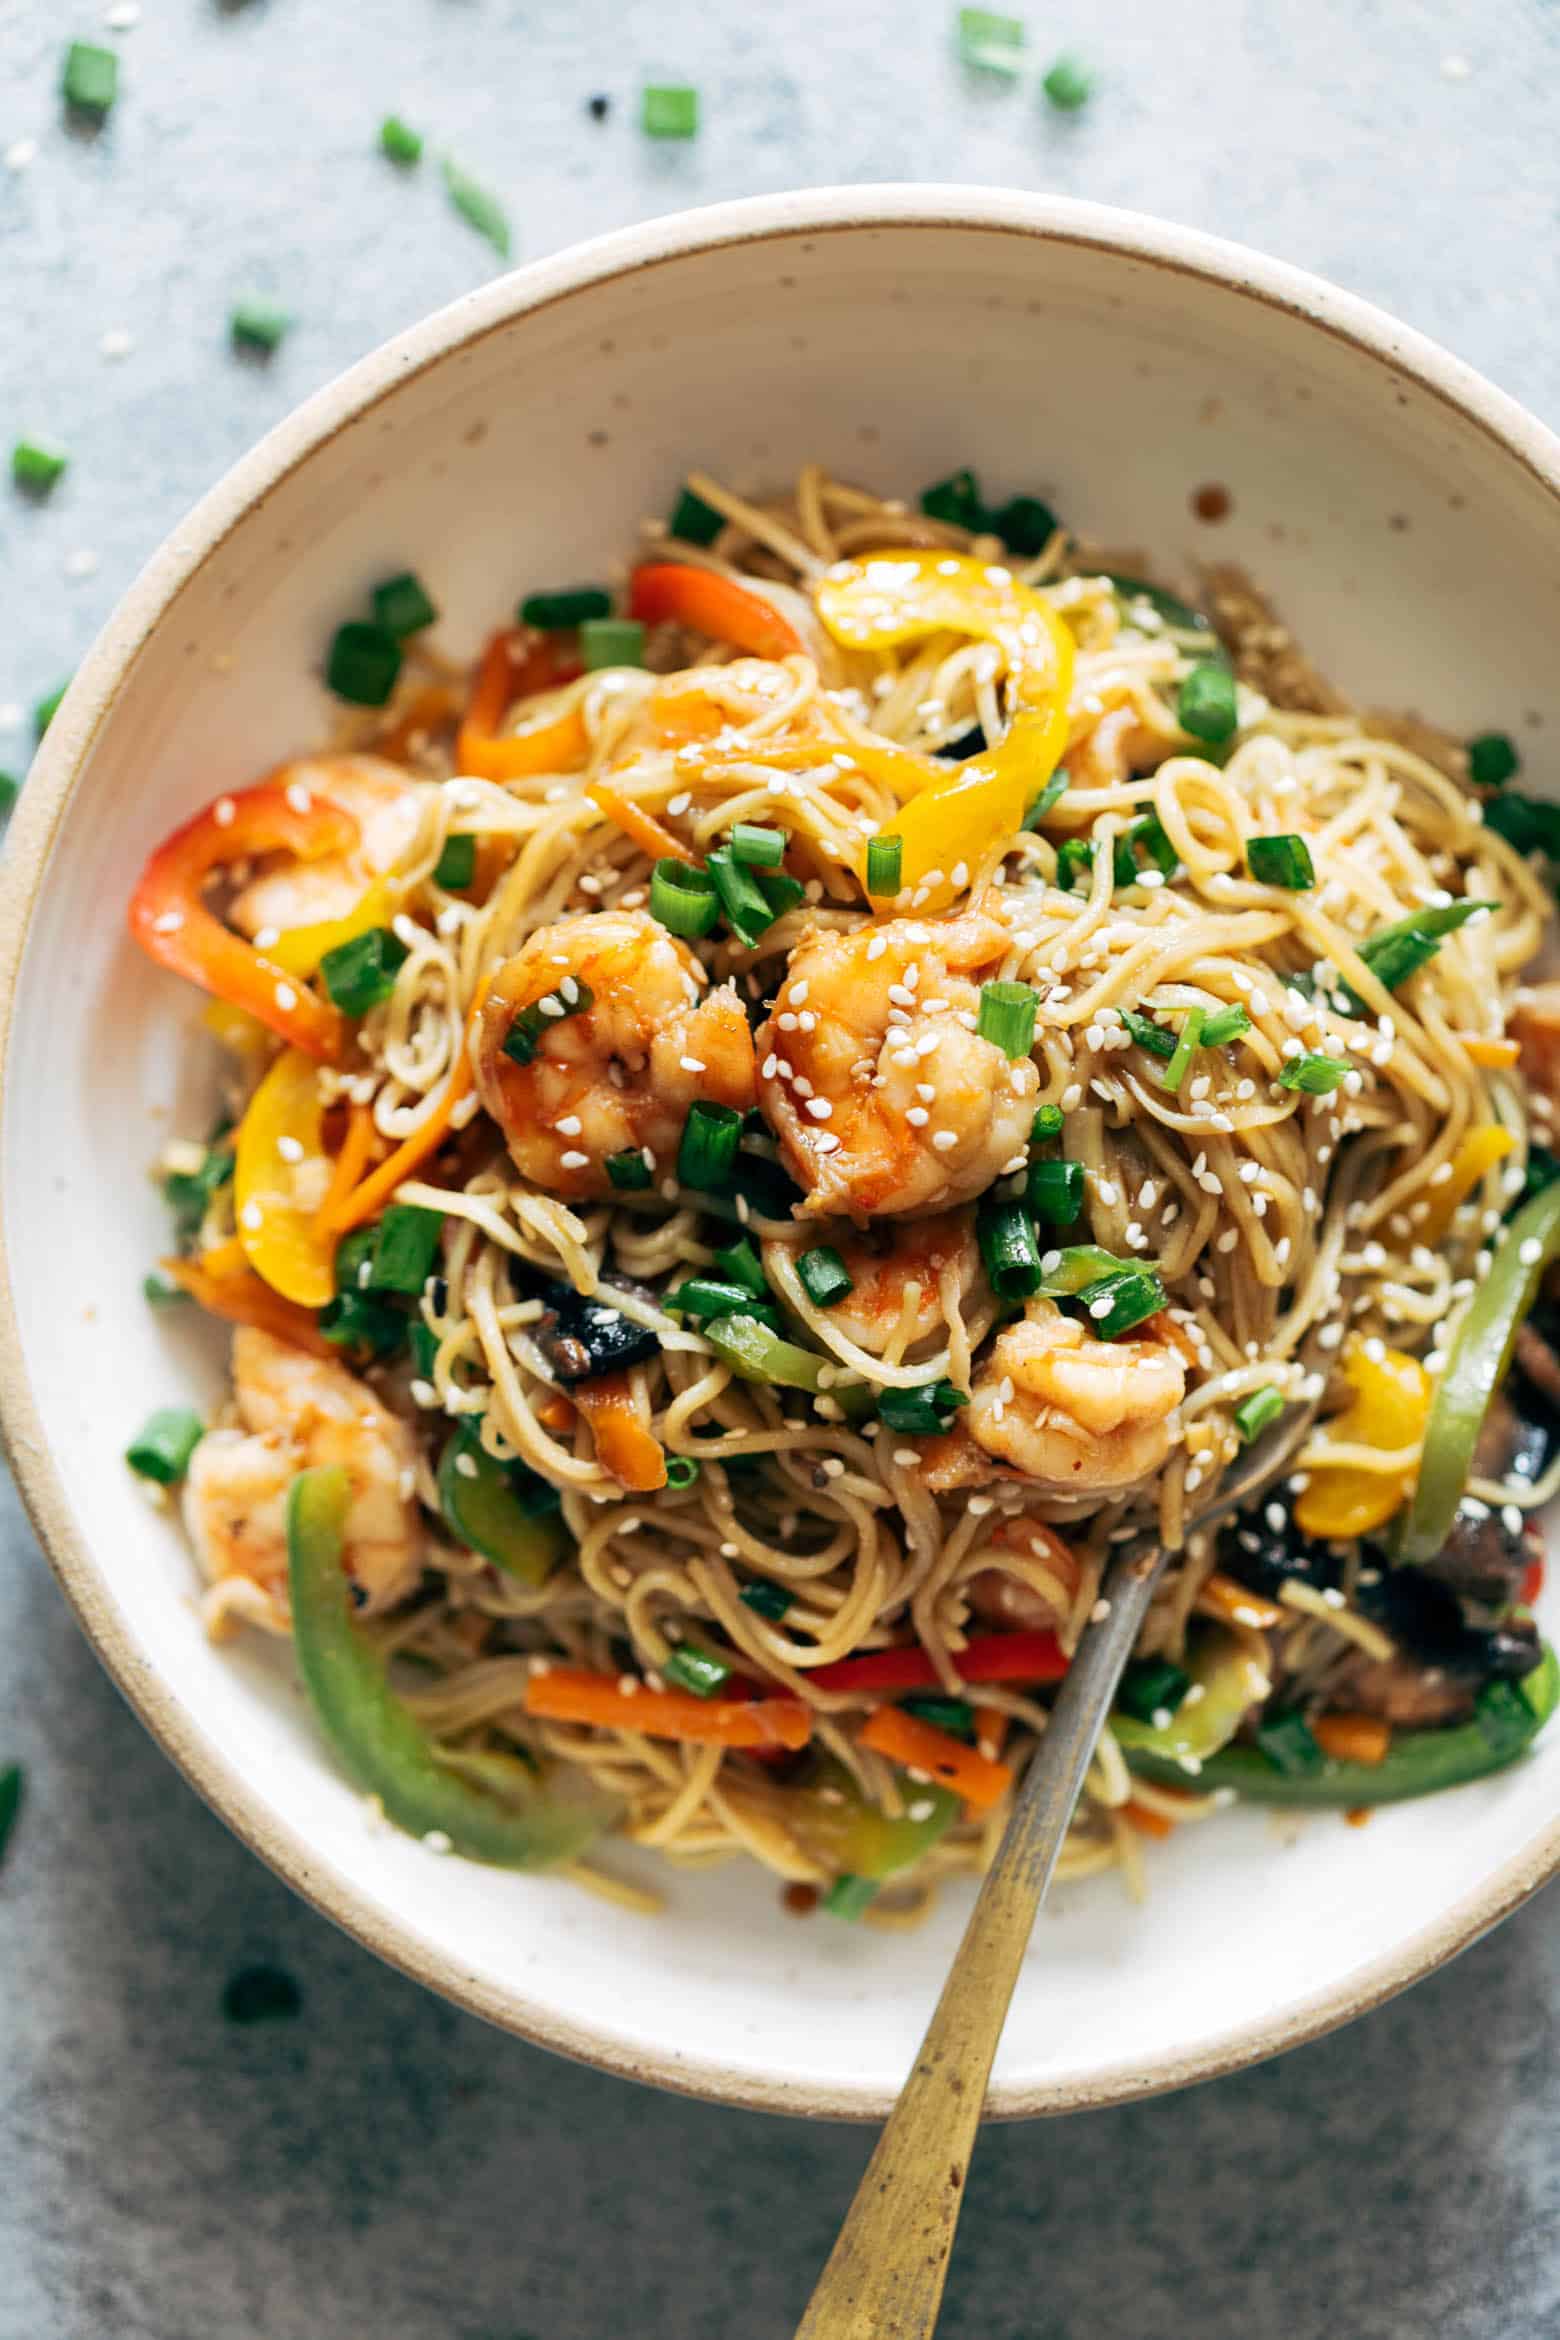 Shrimp Chow Mein is an easy, one pot meal thats loaded with shrimp, fresh vegetables and flavour. Its the best way to get weeknight dinner on the table in under 30 minutes and is better than takeout!